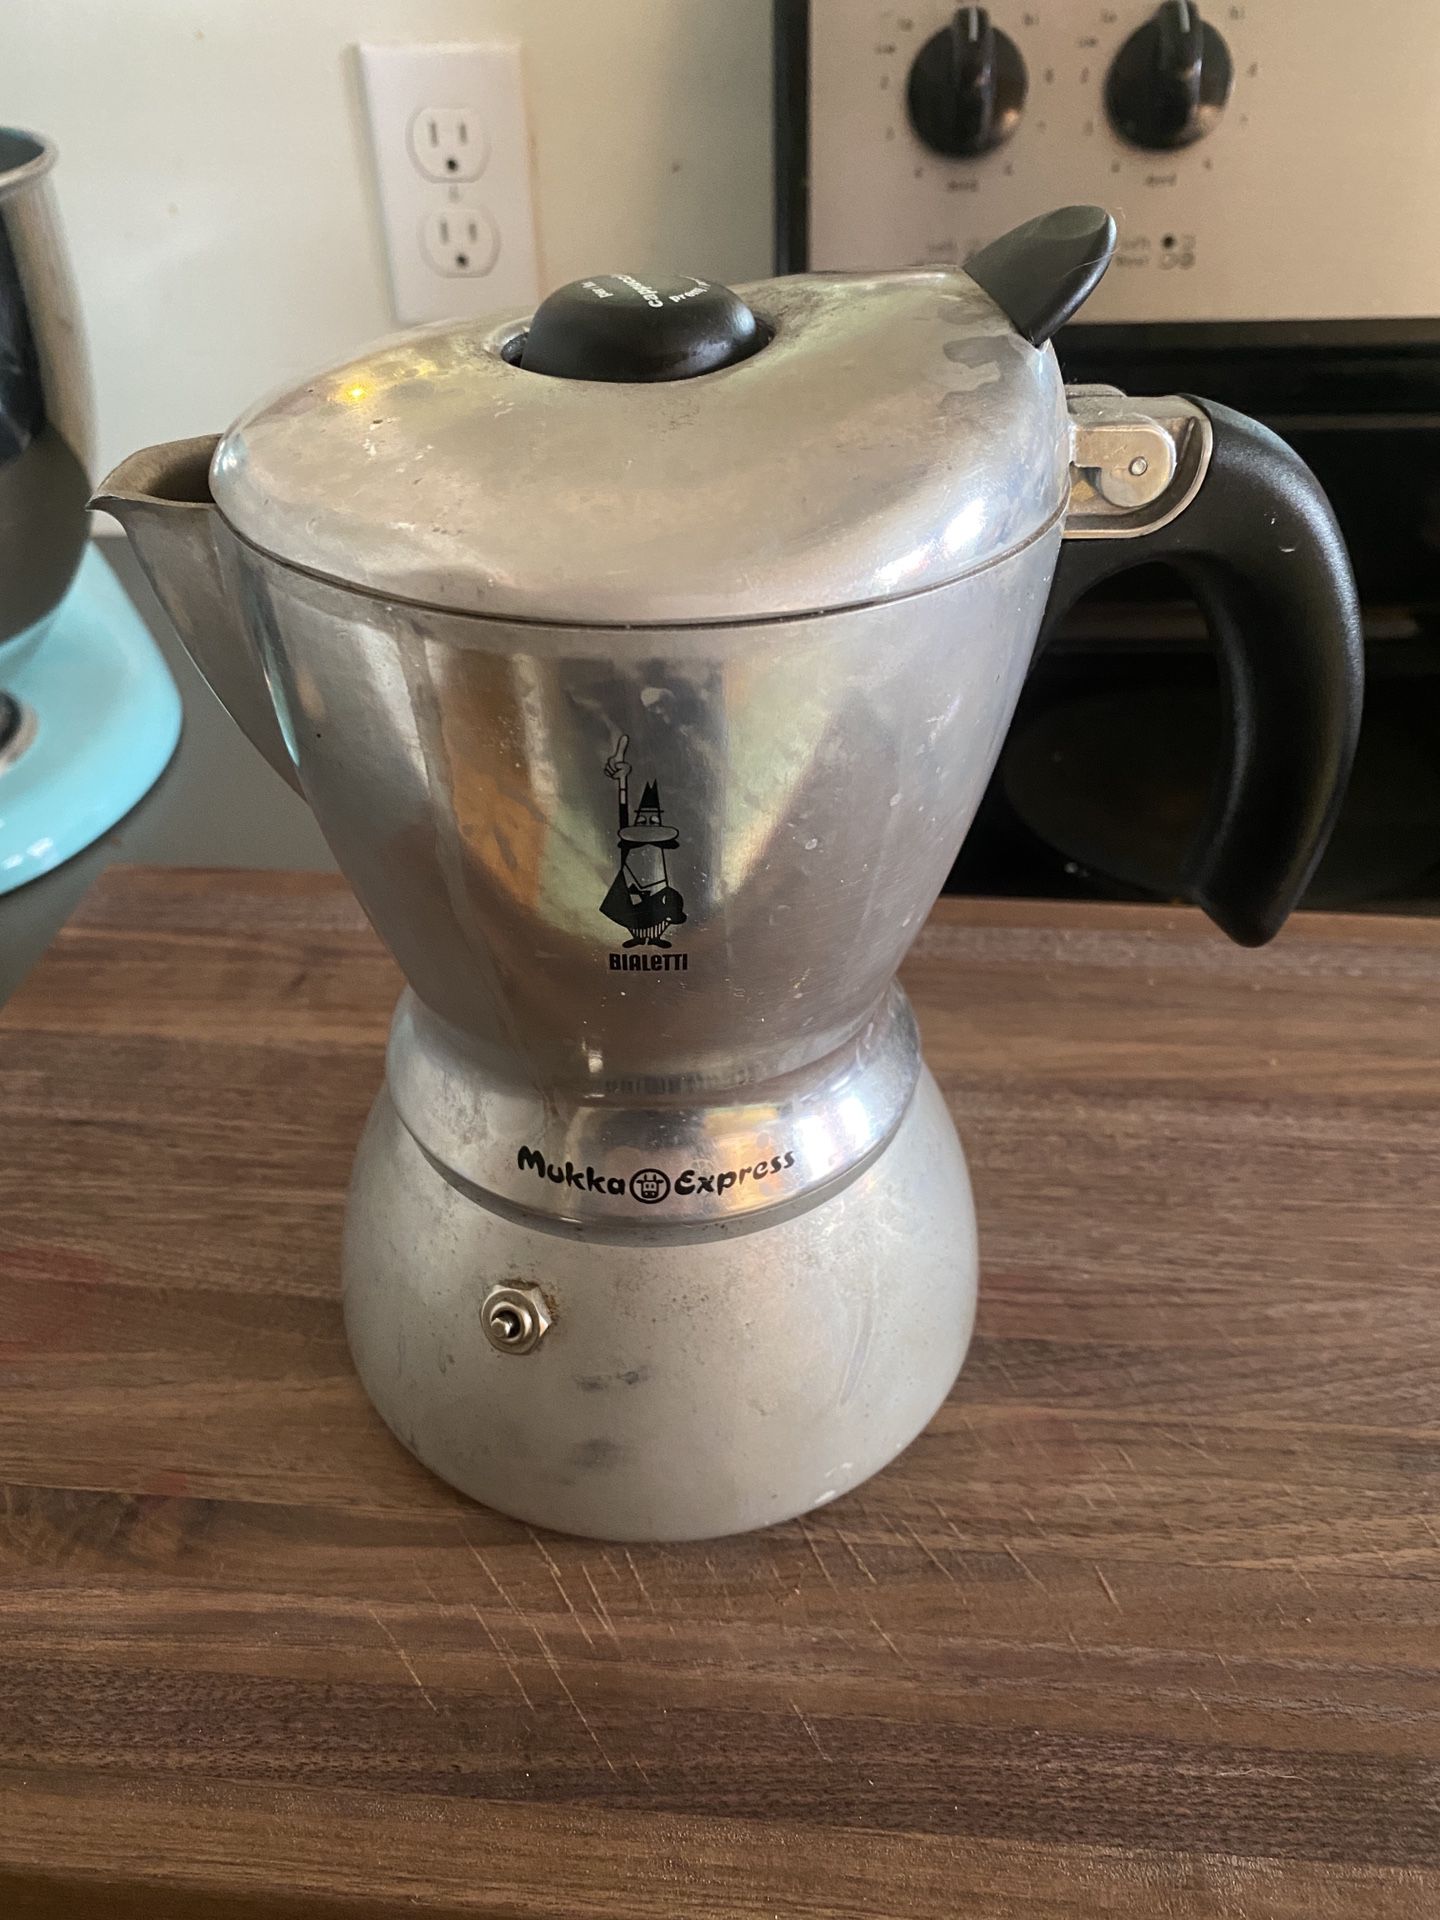 Bialetti express stove top coffee maker